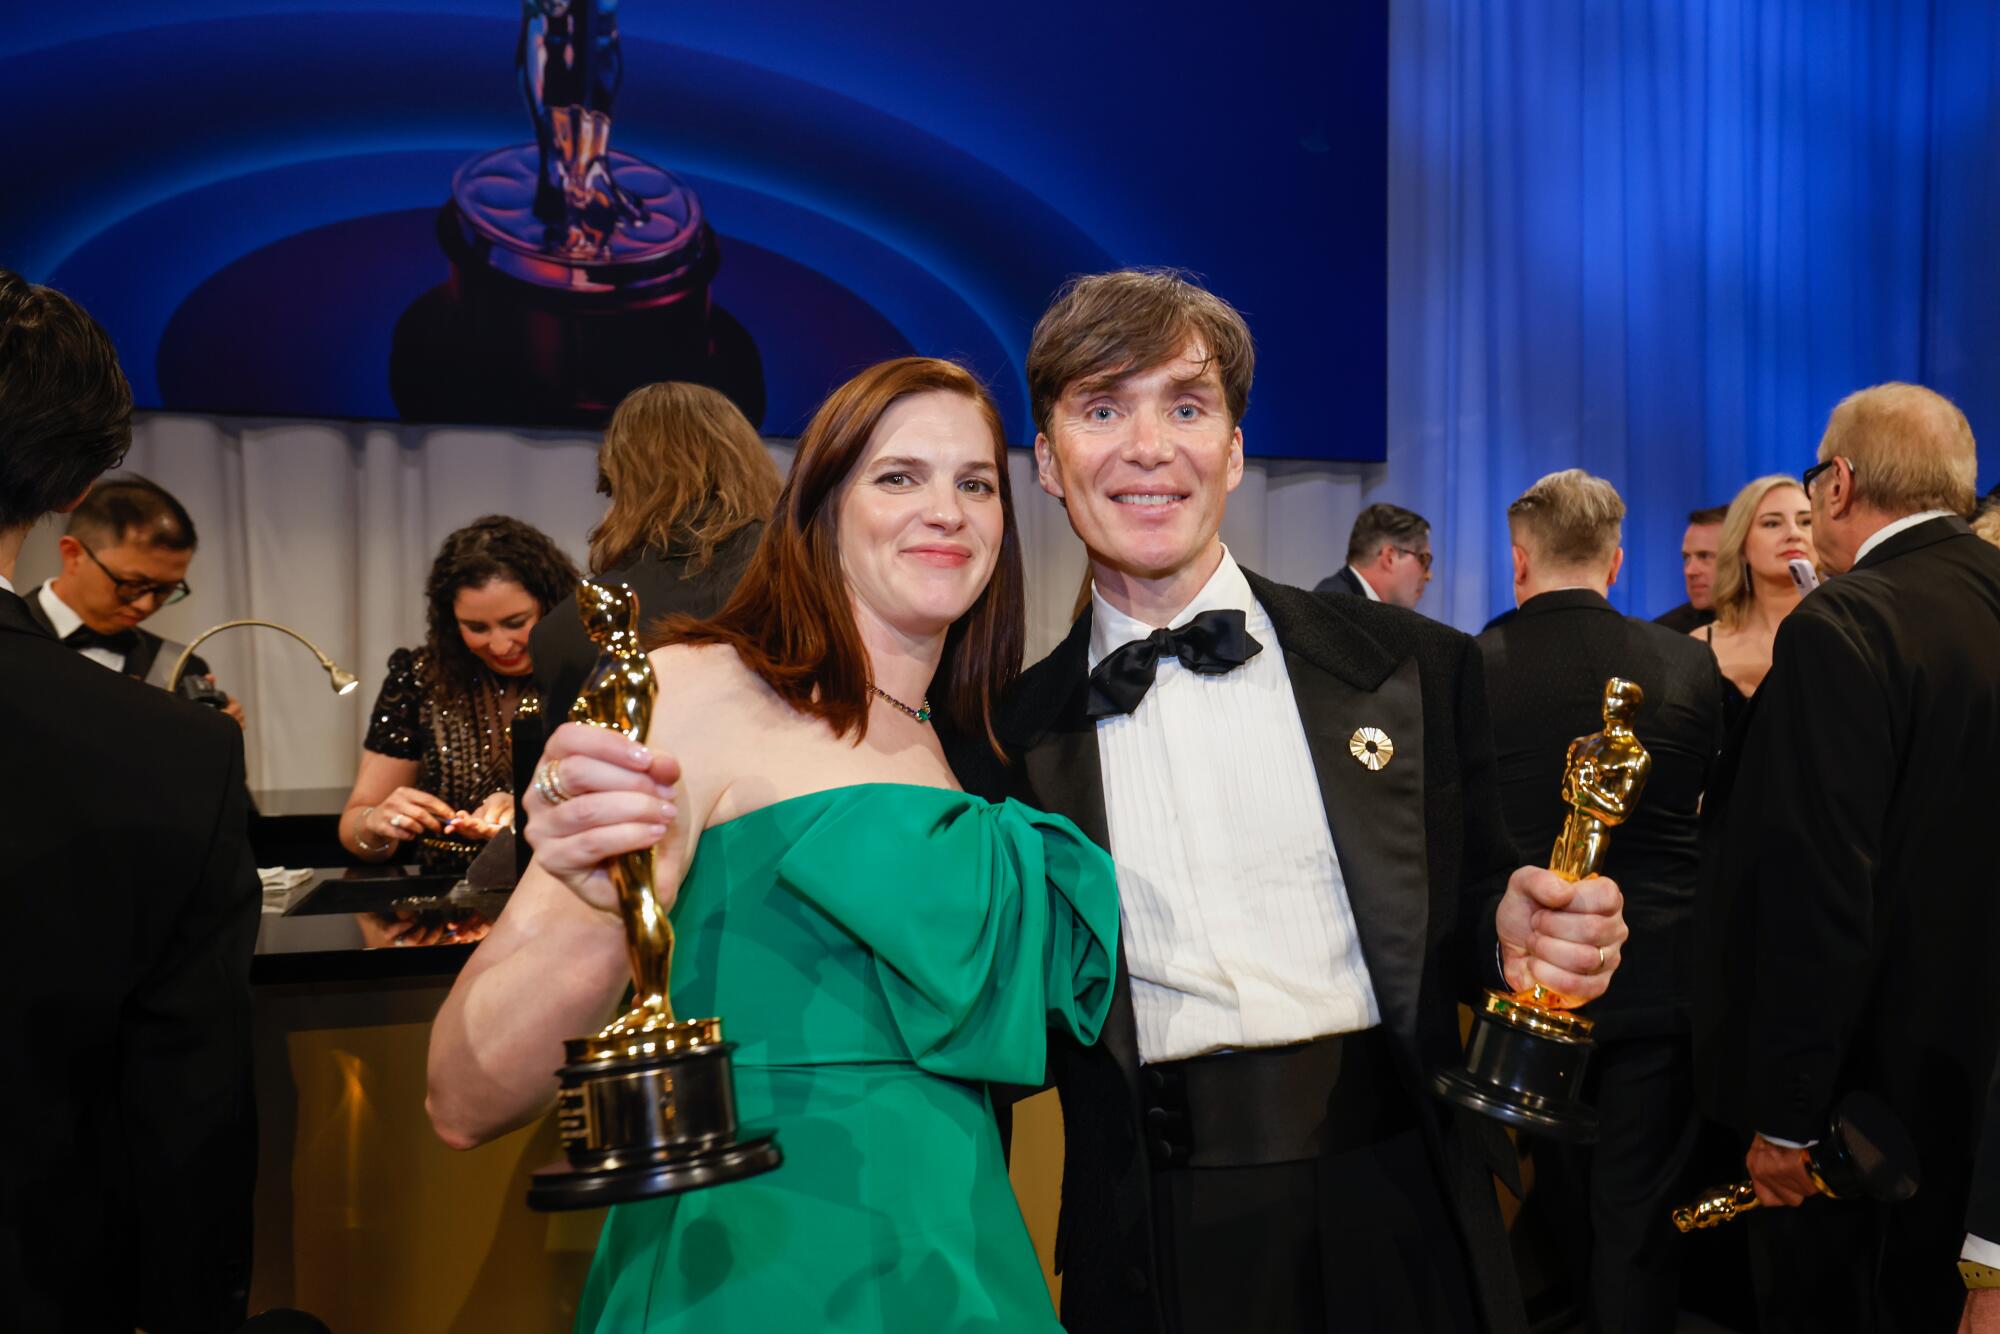 A woman and a man hold Oscars and smile for the camera.